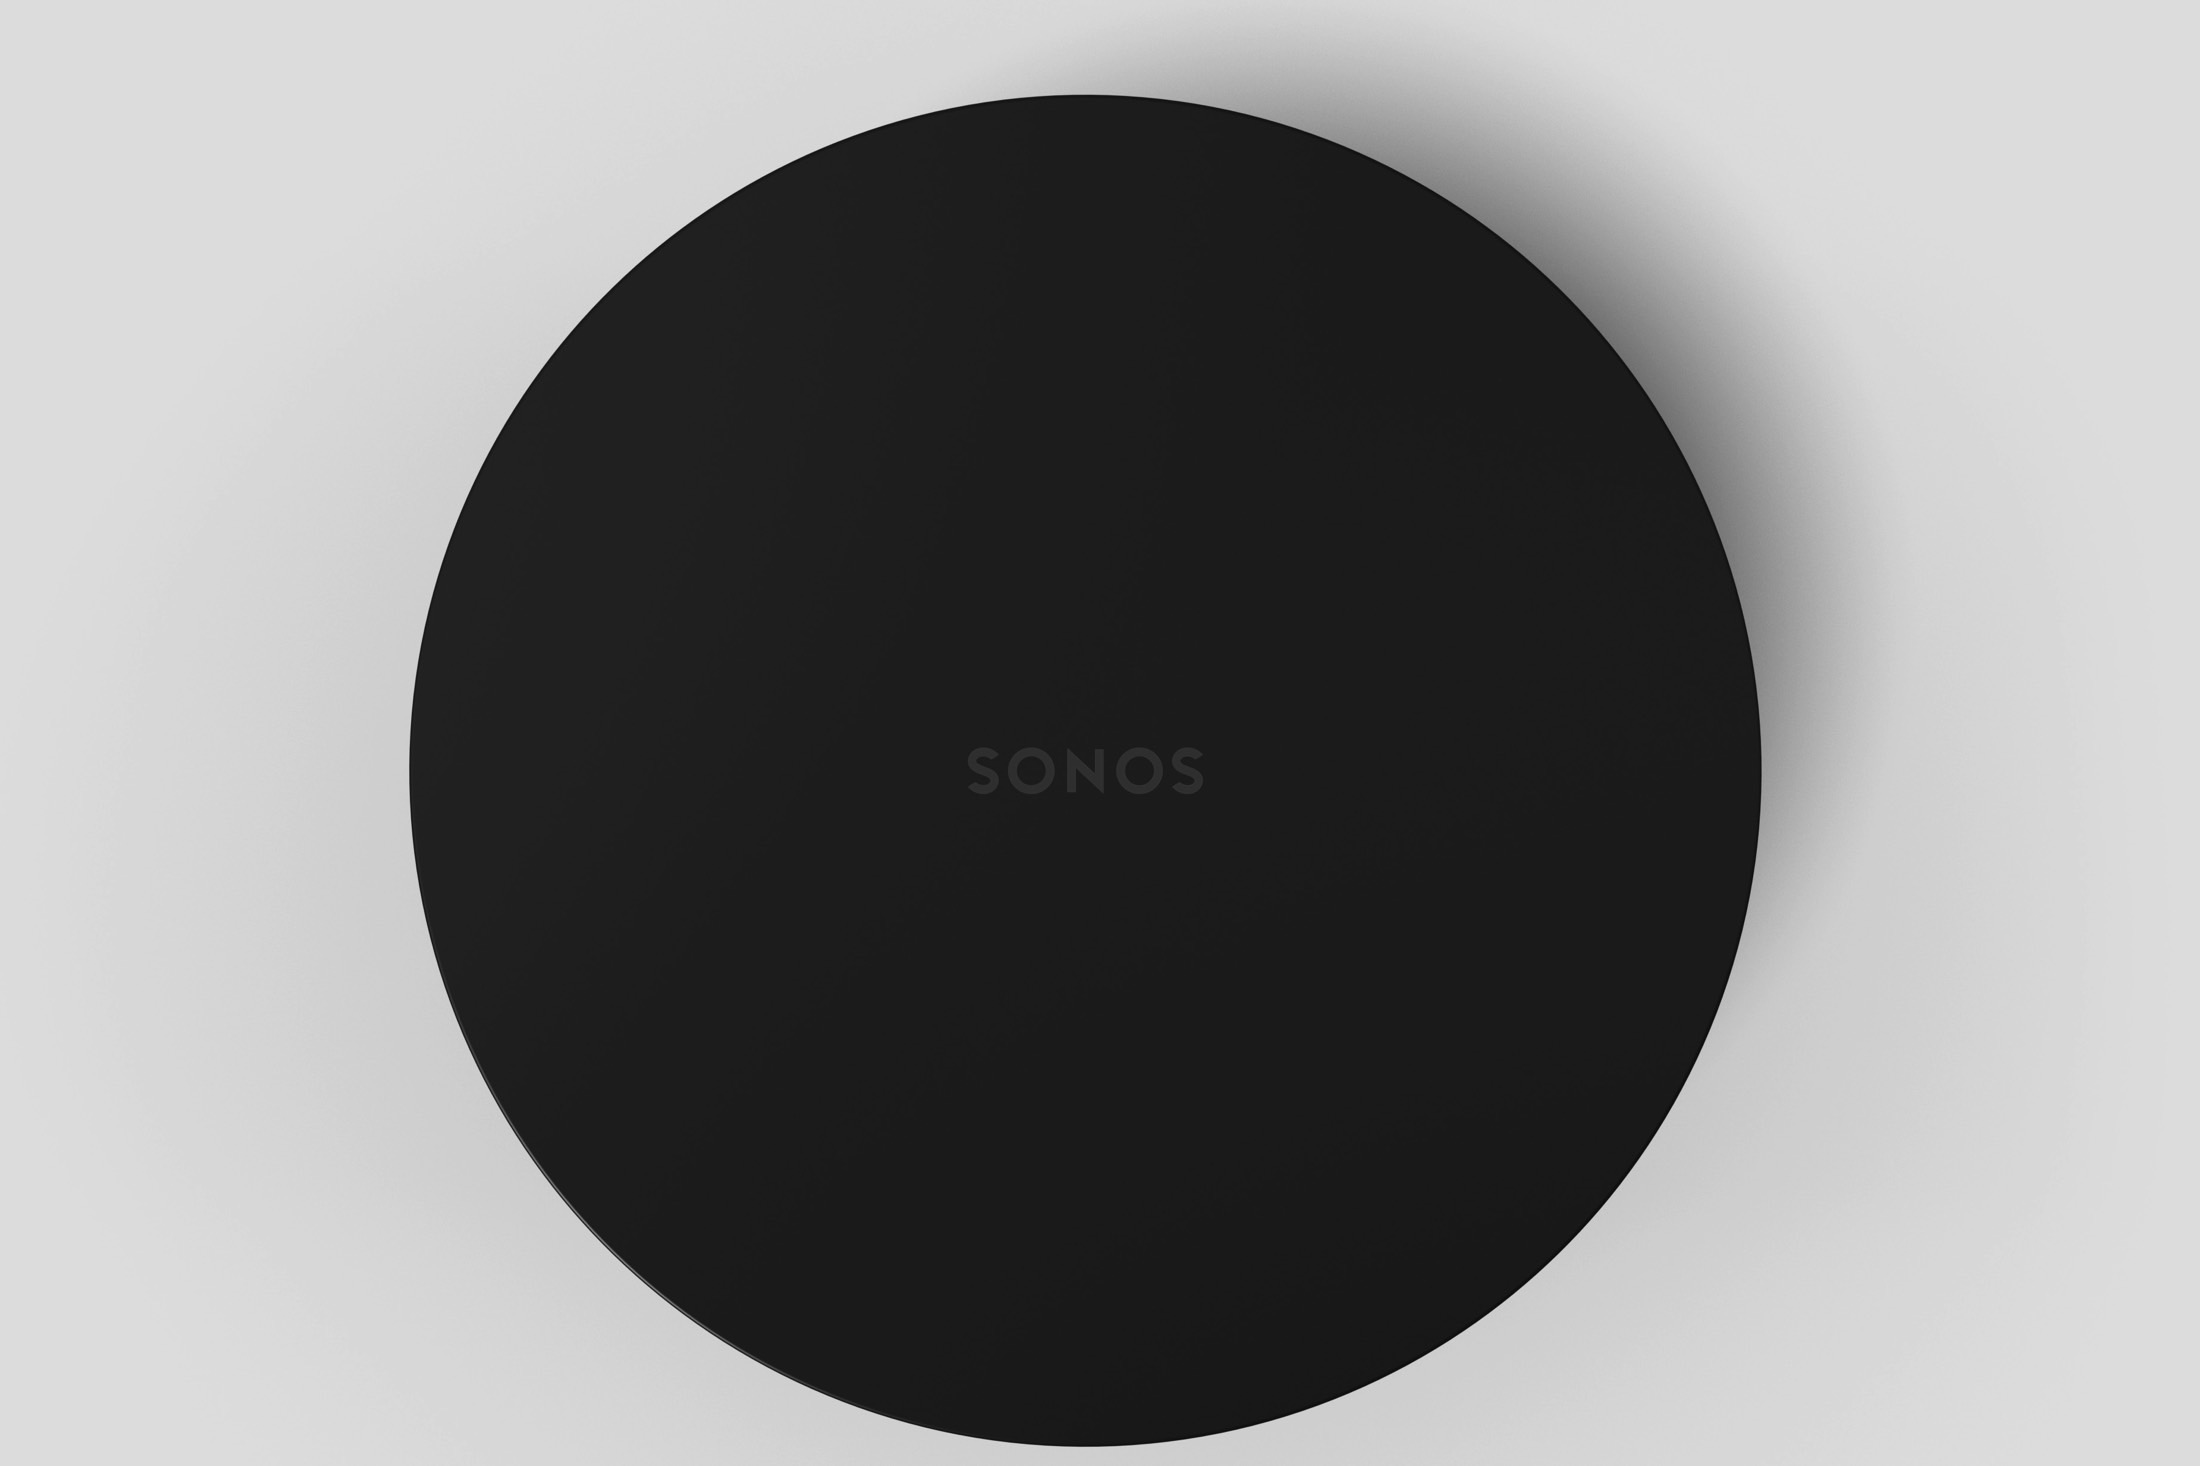 Sonos Sub Mini in black seen from the top.